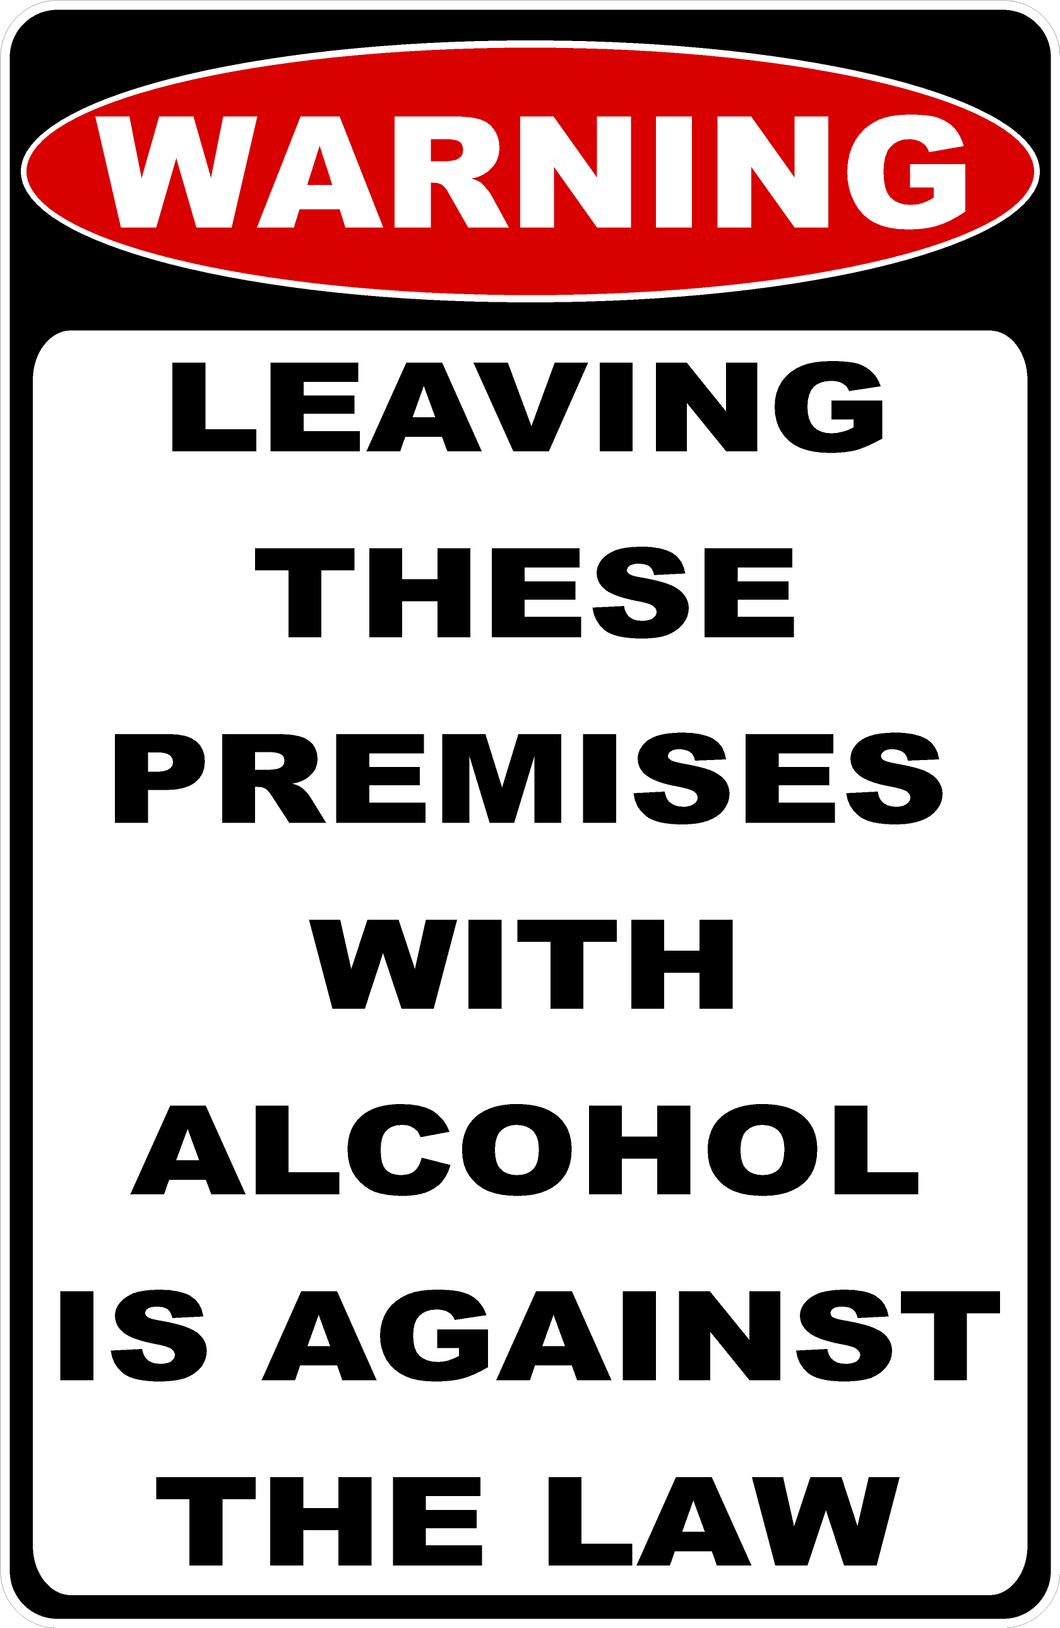 Warning Leaving These Premises with Alcohol Is Against The Law Sign